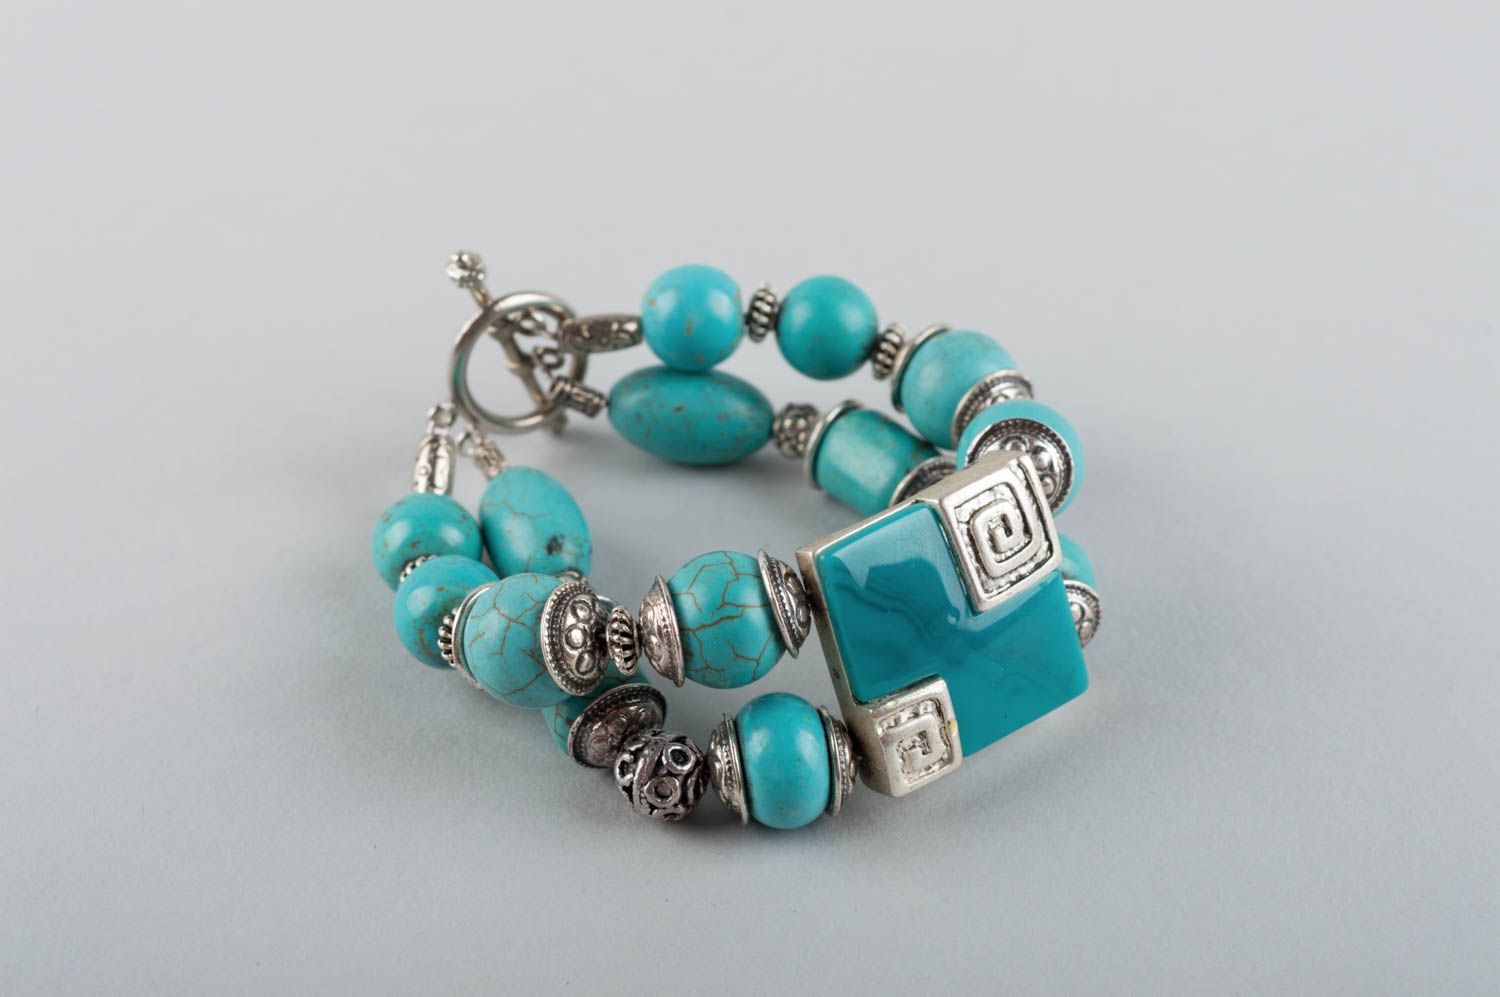 Handmade jewelry made of natural stones bracelet made of turquoise and brass photo 2